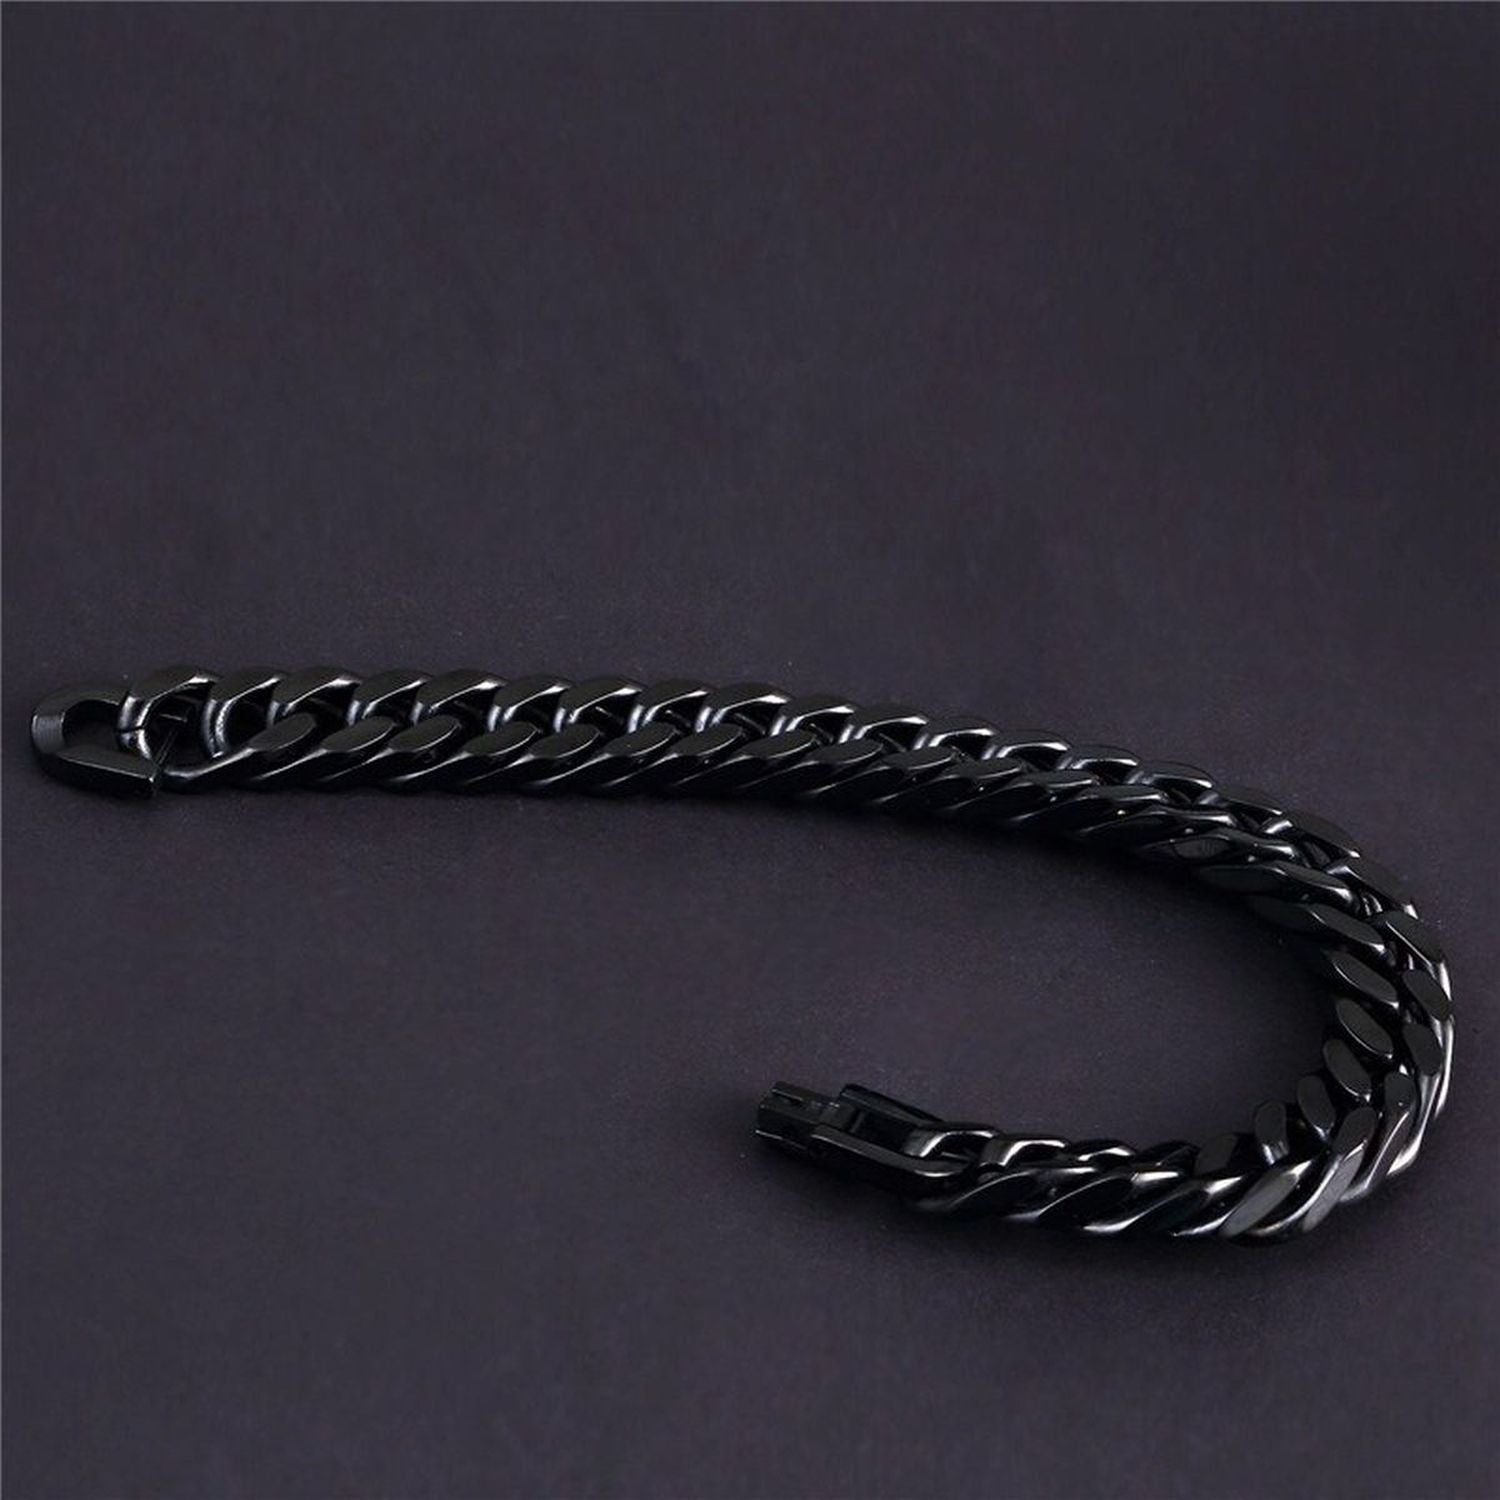 Stainless Steel Curb Chain Bracelet for Men Classic and Timeless Design  Ideal for Everyday Wear or Special Occasions  Mens bracelet silver Mens  chain bracelet Stainless steel bracelet men